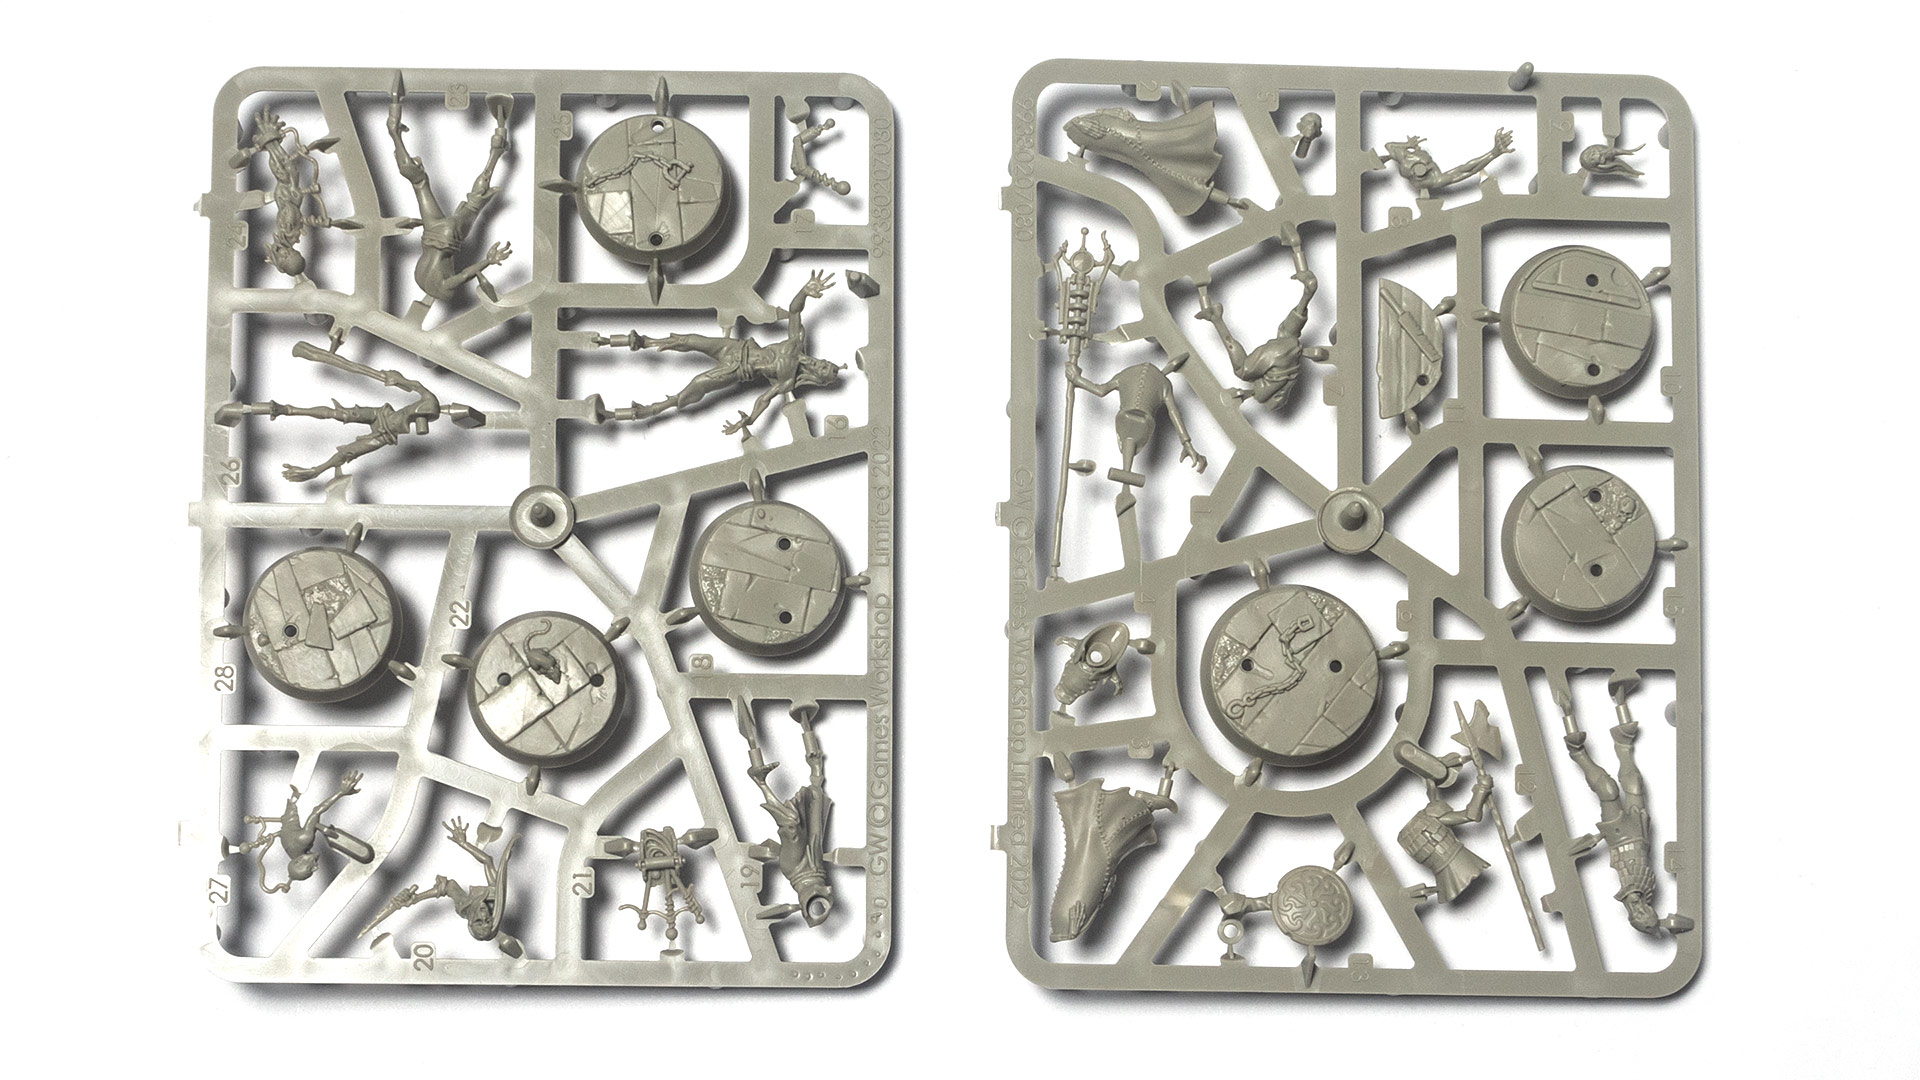 The Exiled Dead Sprues unboxing